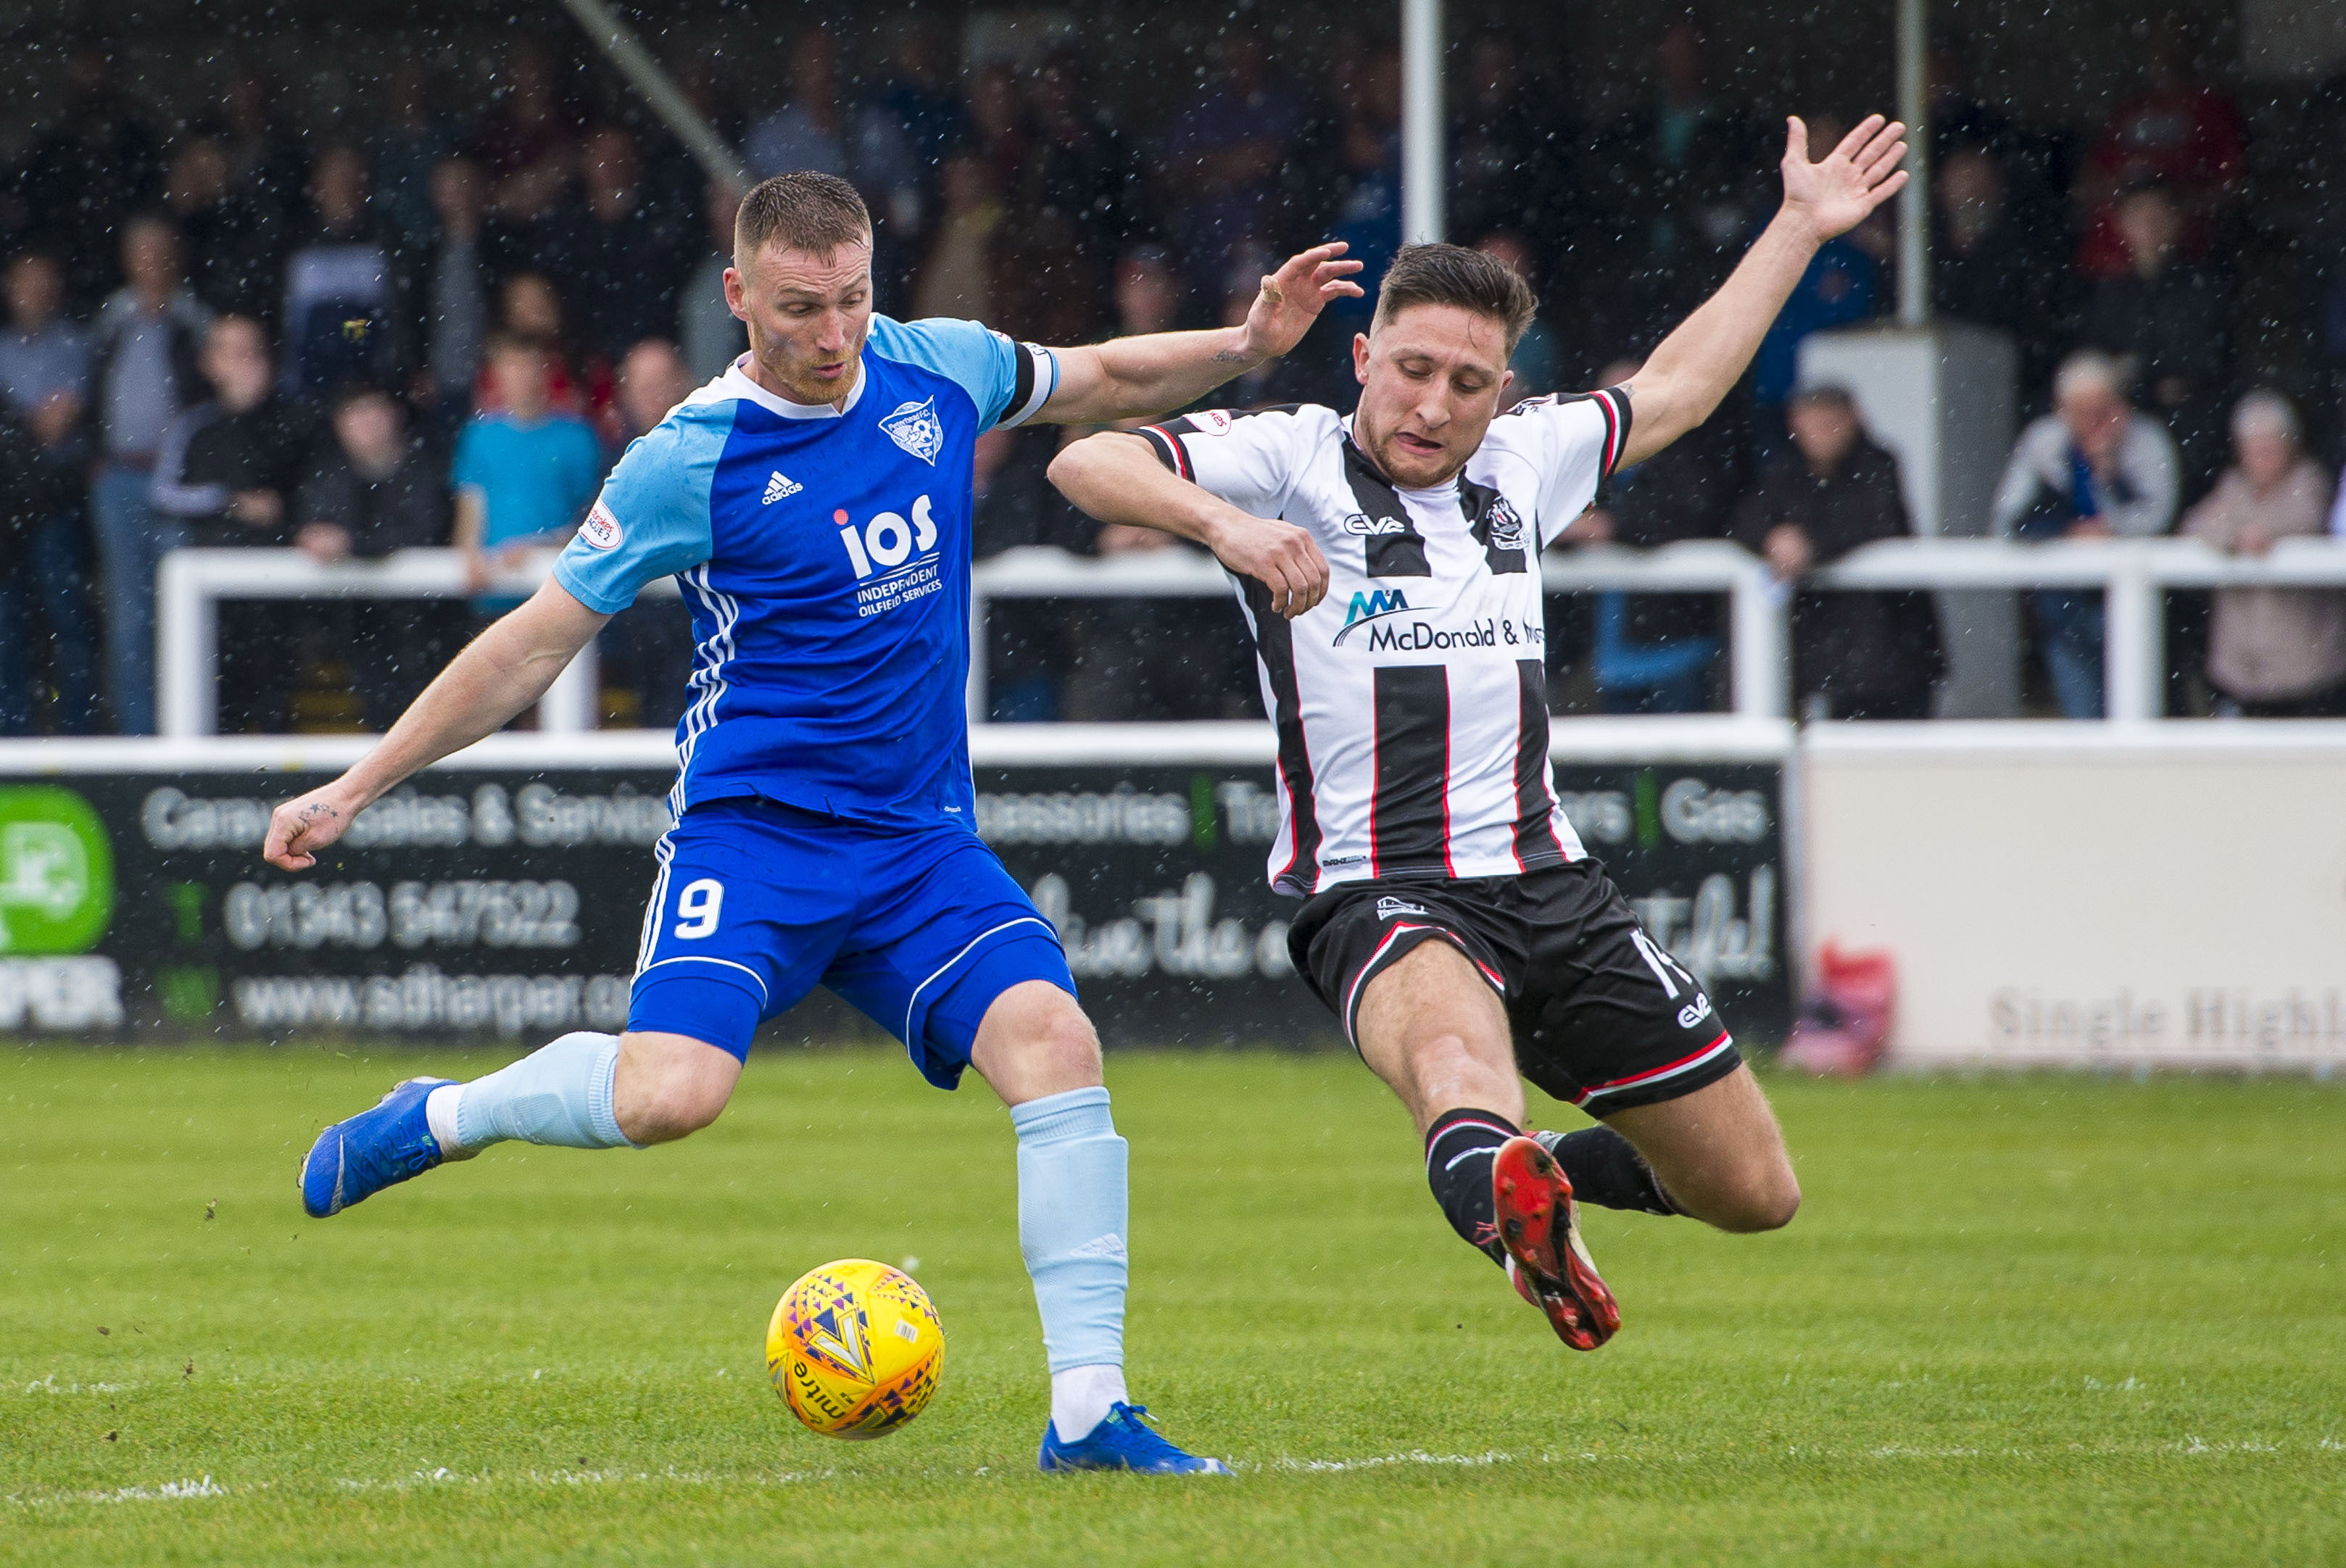 Stephen Bronsky has signed a contract extension with Elgin